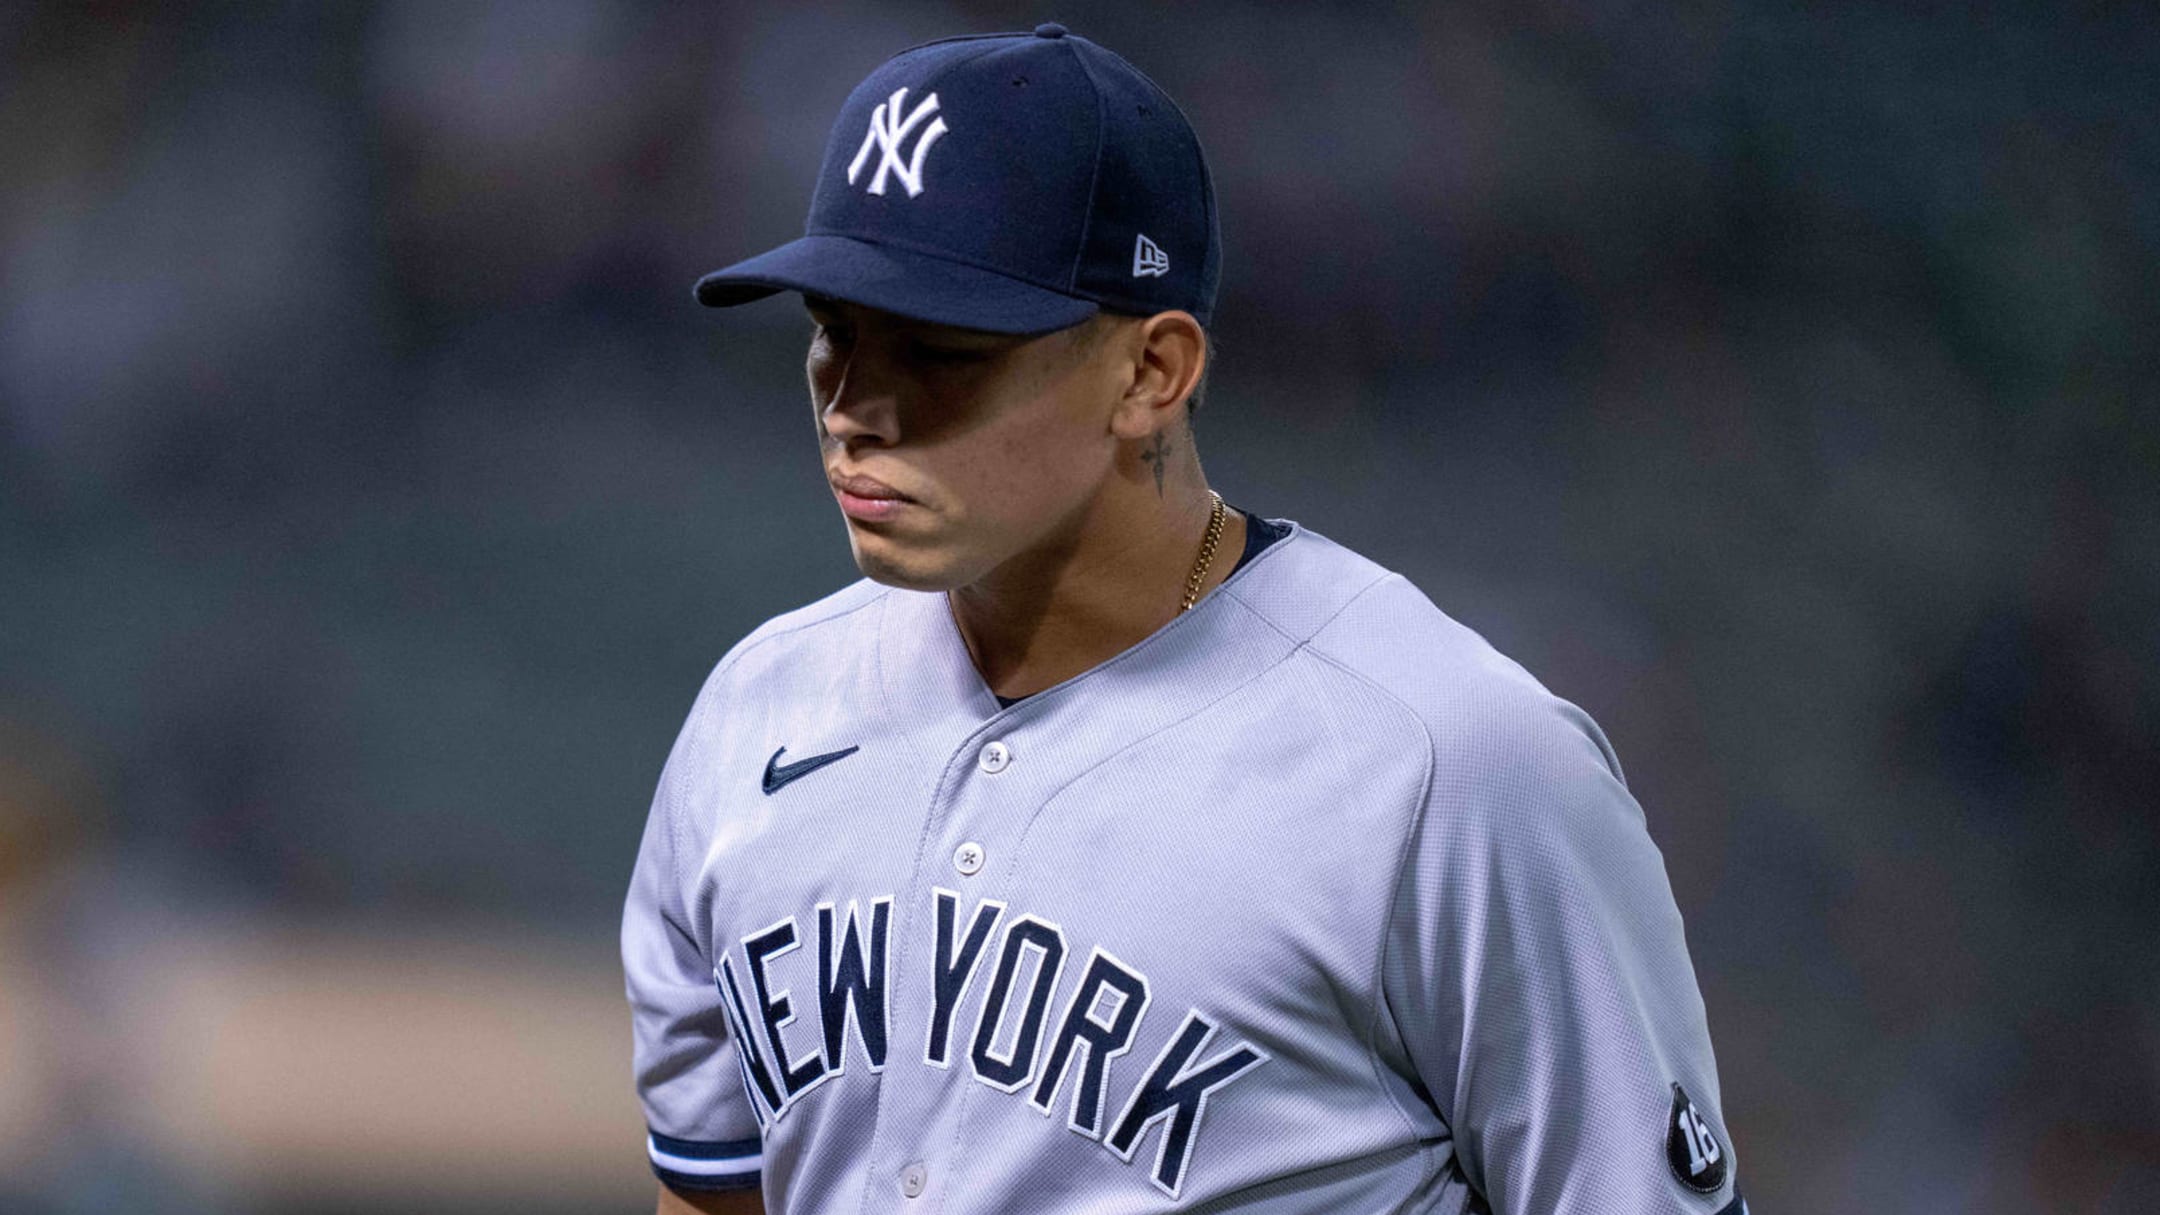 Yankees place pitcher Jonathan Loaisiga (shoulder) on IL